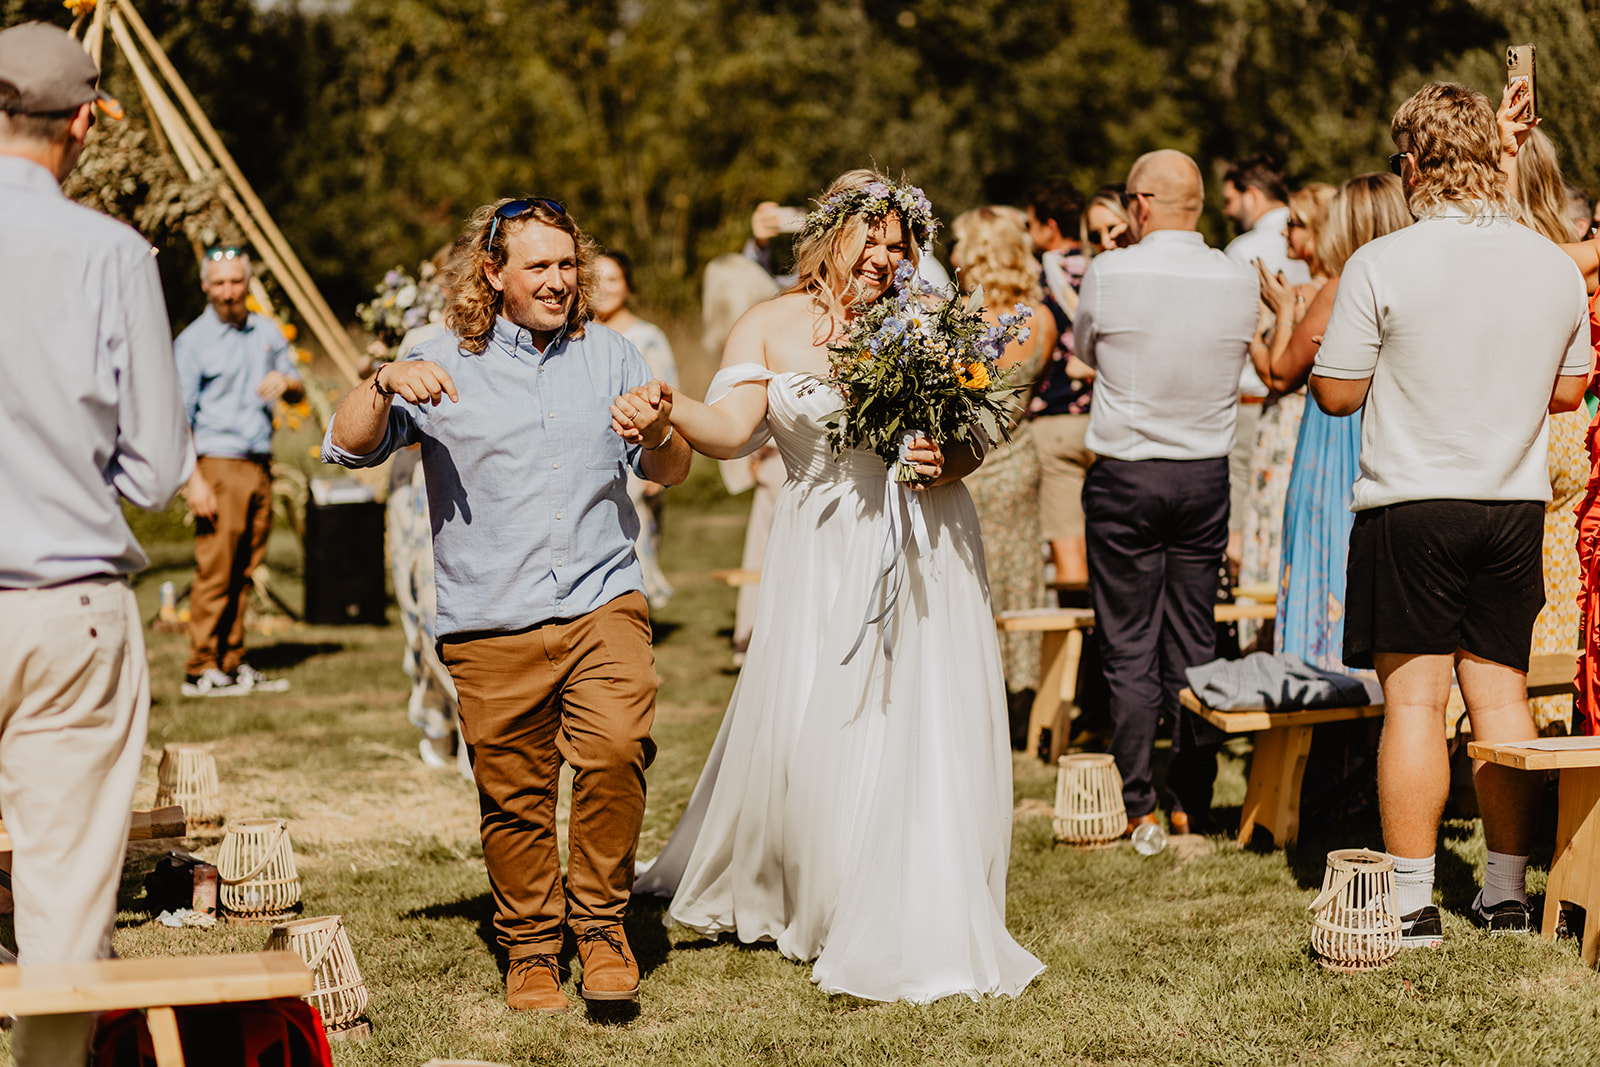 Bride and Groom walking down the aisle at a wedding at Mac's Farm in Sussex. By OliveJoy Photography.